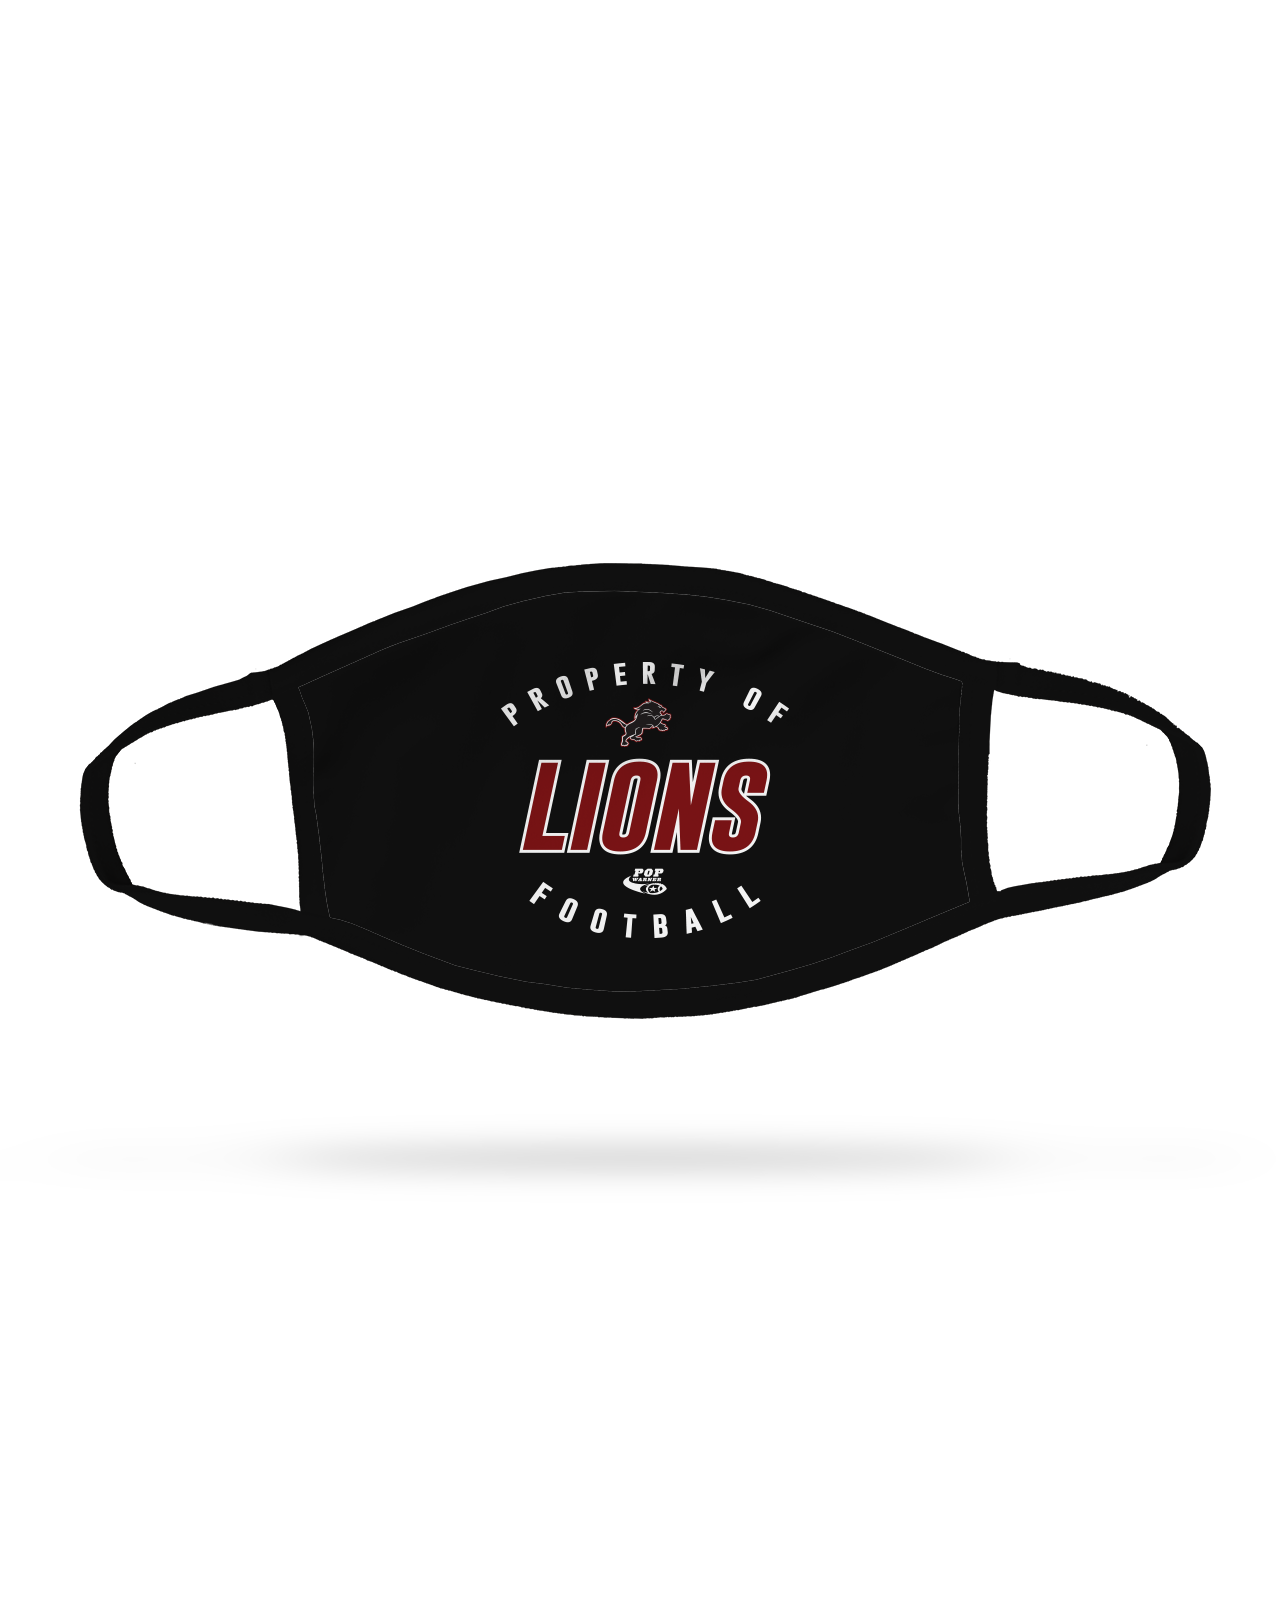 LIONS01 Premium Face Mask with elastic ear loop straps.Printed all over in HD on premium fabric. Handmade in California. 